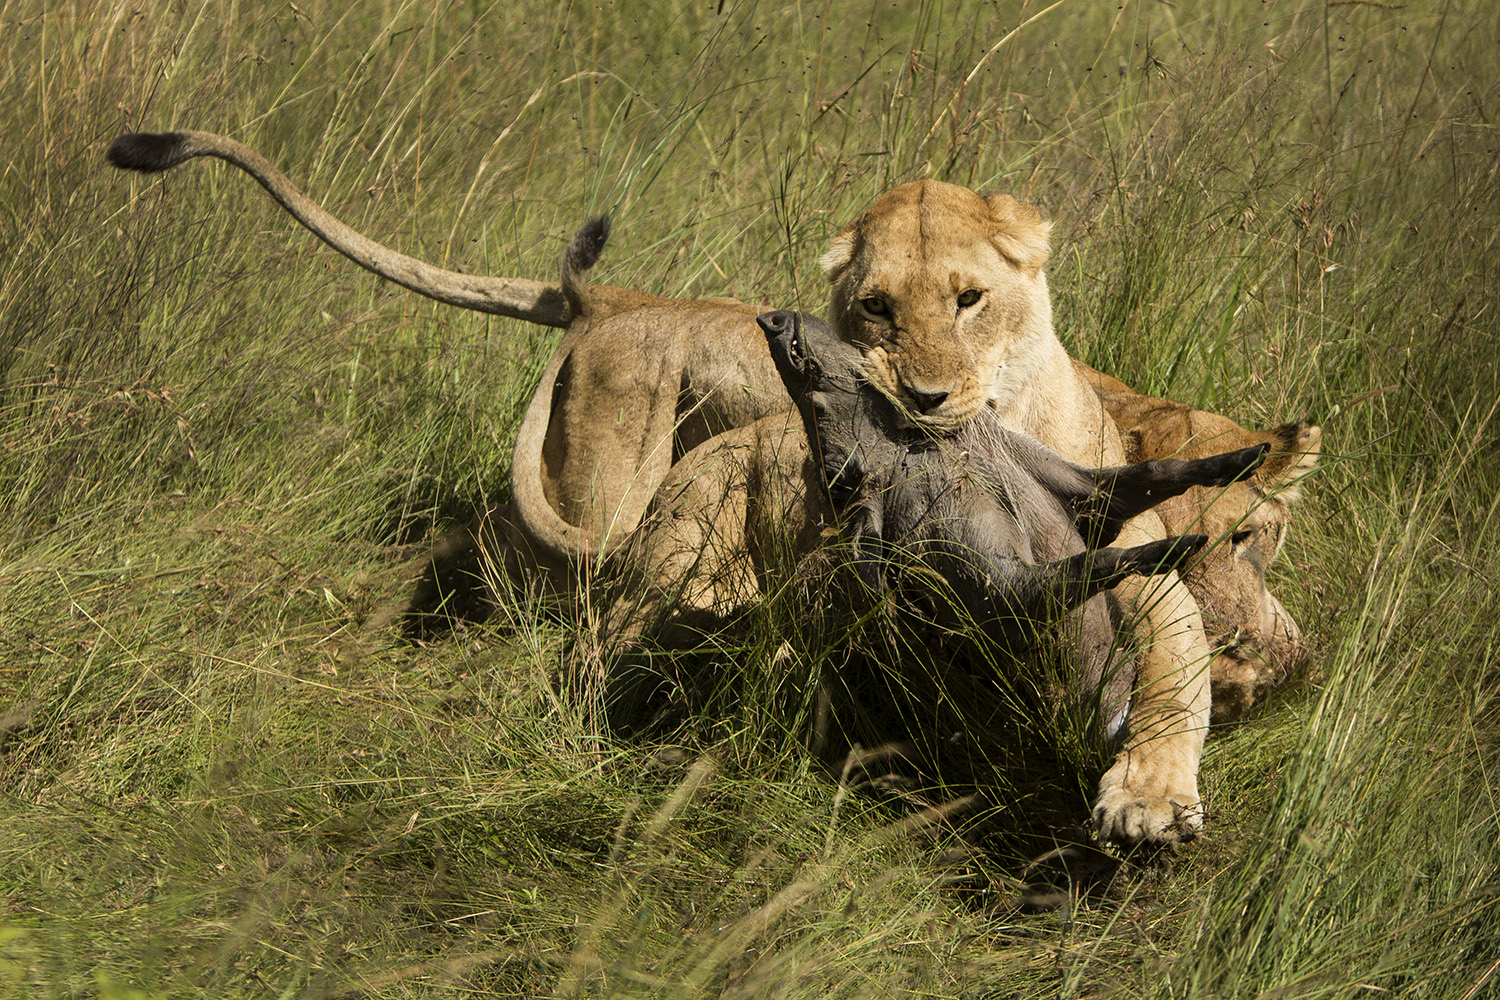 Lioness and warthog fight